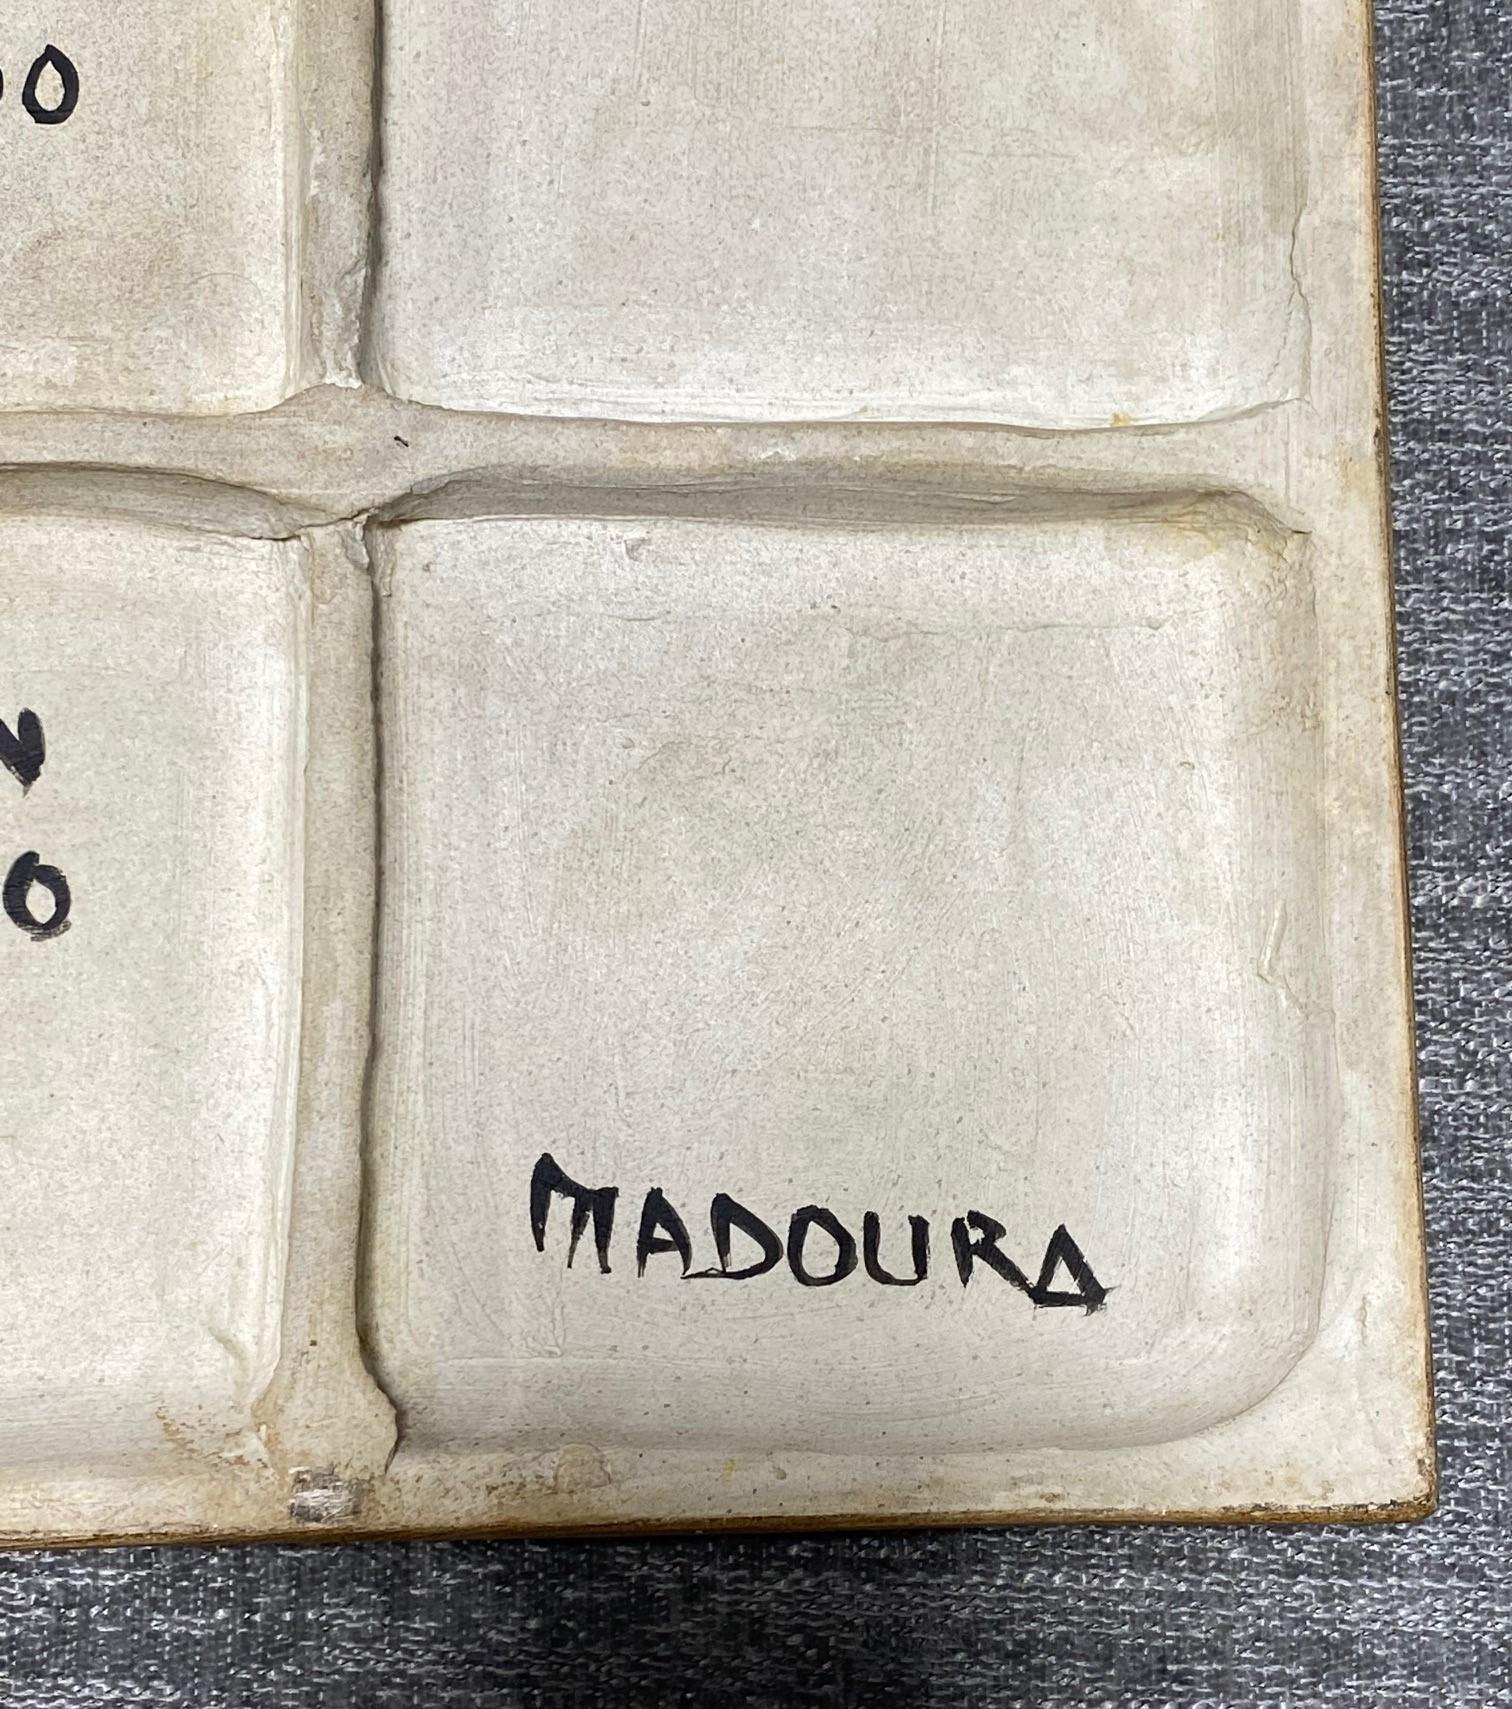 Pablo Picasso Signed Madoura Ceramic Tile Plaque 'Tête Polychrome' Ramié 455 In Good Condition For Sale In Studio City, CA